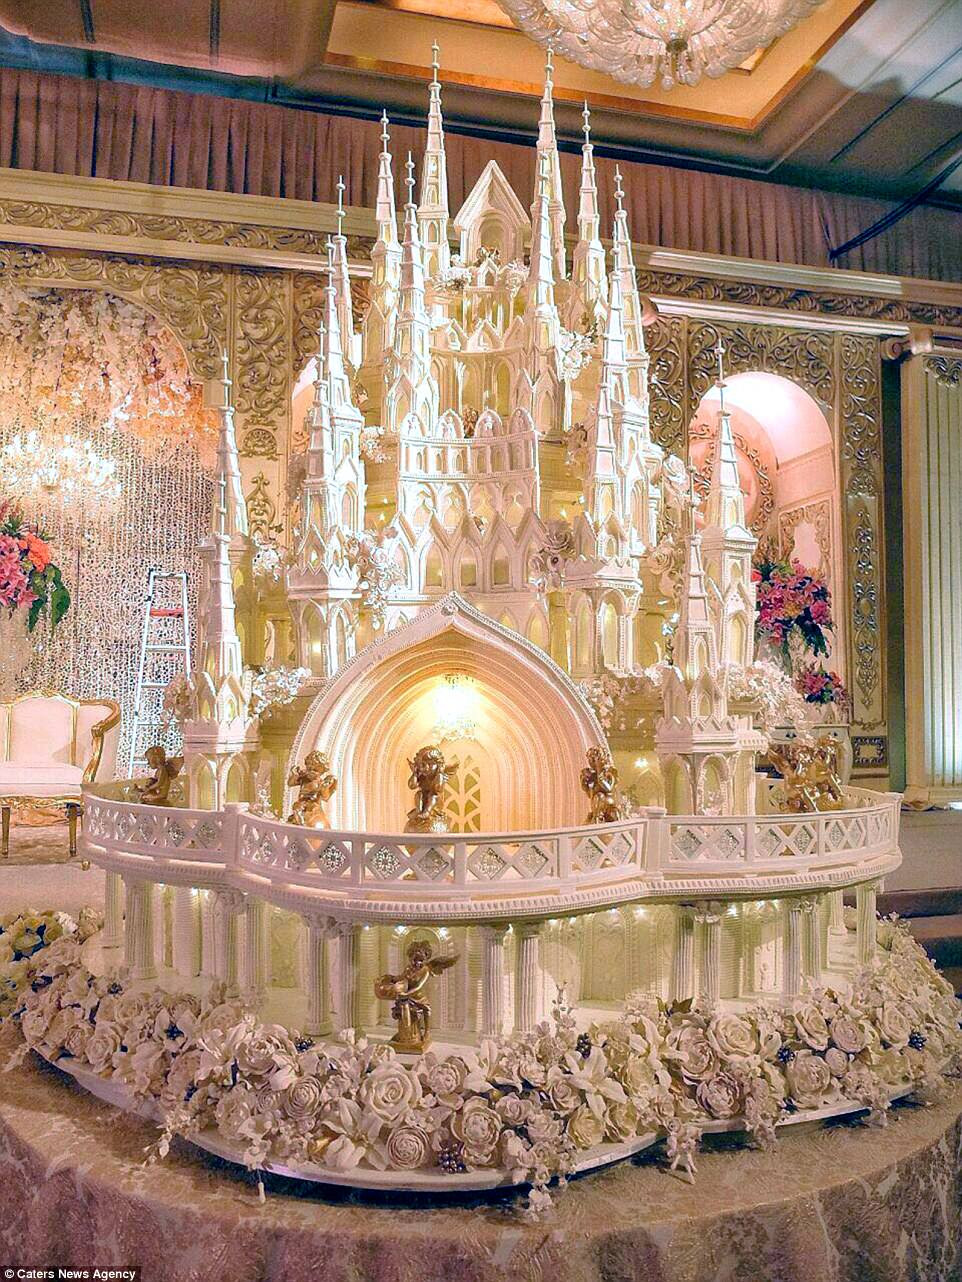 Elaborate Wedding Cakes
 Are these the most elaborate wedding cakes of all time